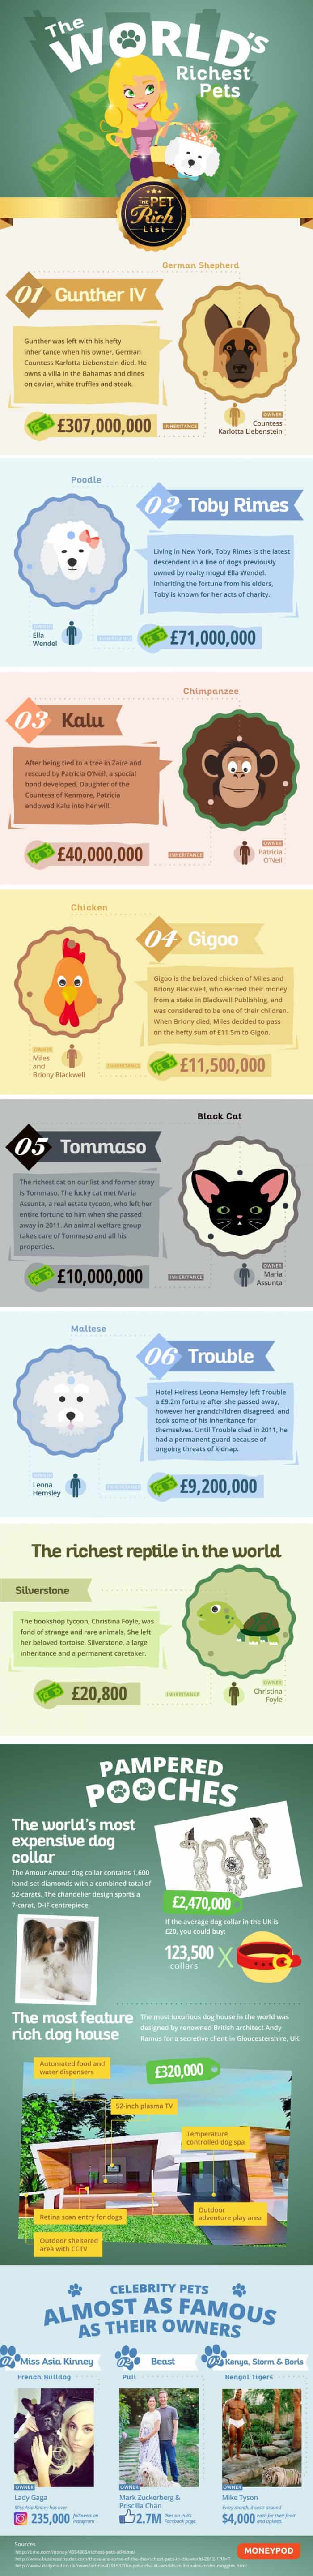 infographic describes some of the world's richest pets, many of whom have hefty inheritances